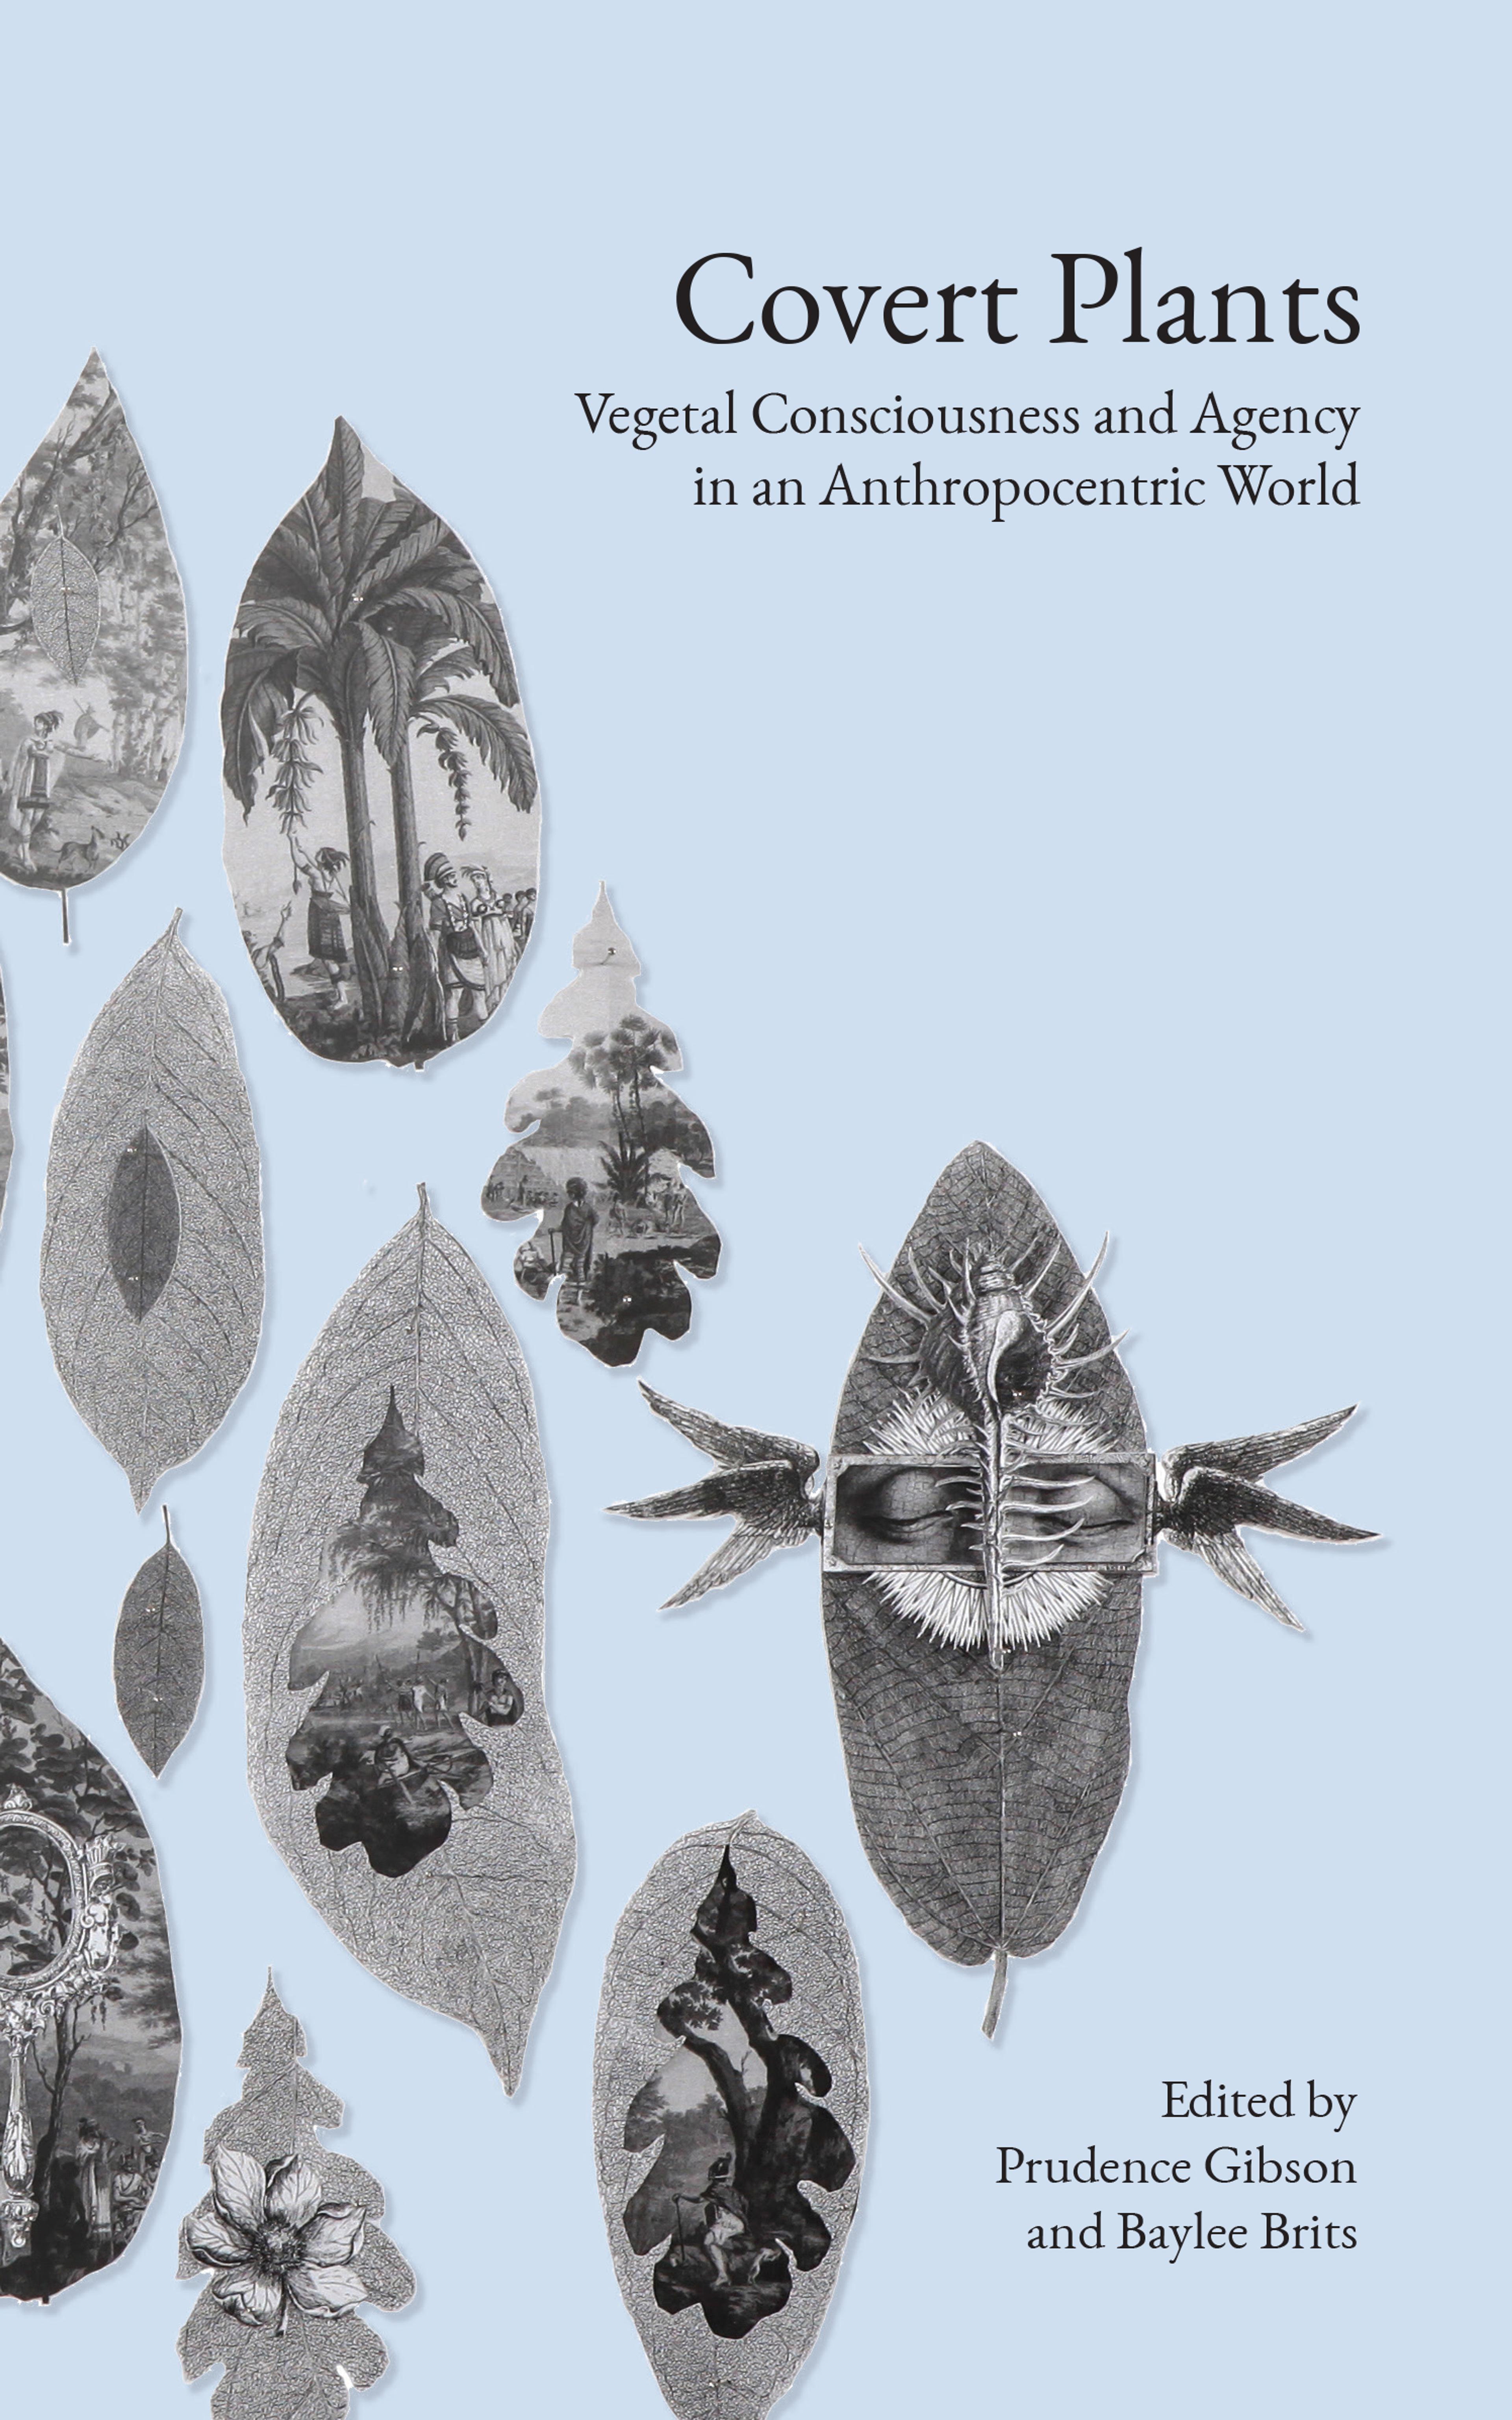 Cover of book titled Covert Plants: Vegetal Consciousness and Agency in an Anthropocentric World